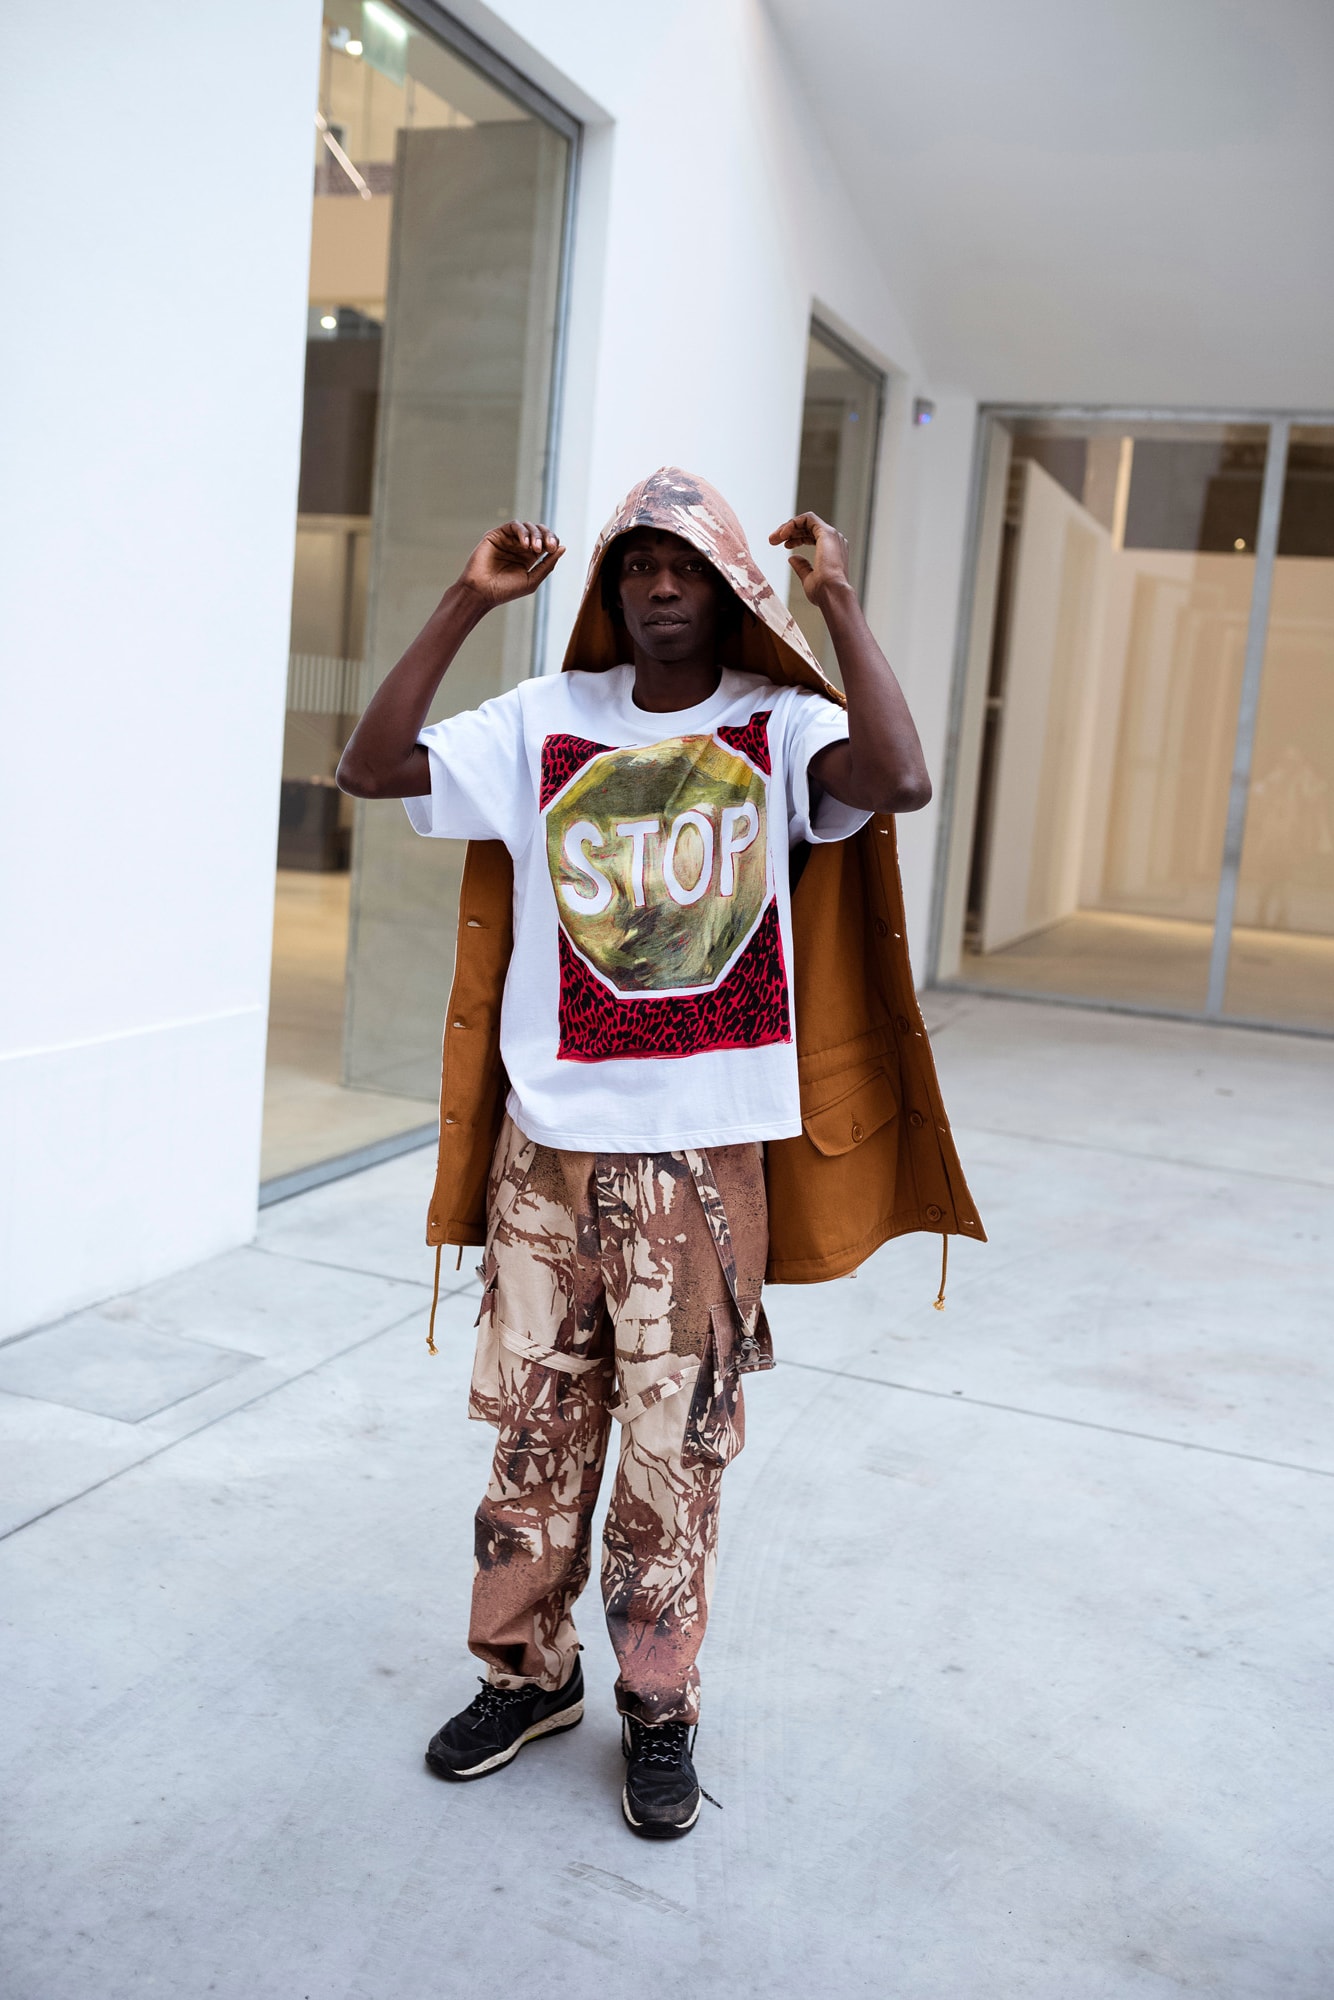 Josh Smith P.A.M. Capsule Collection Perks and Mini Stop Urban Camo T shirt Jacket Coat Pants Overalls Artist